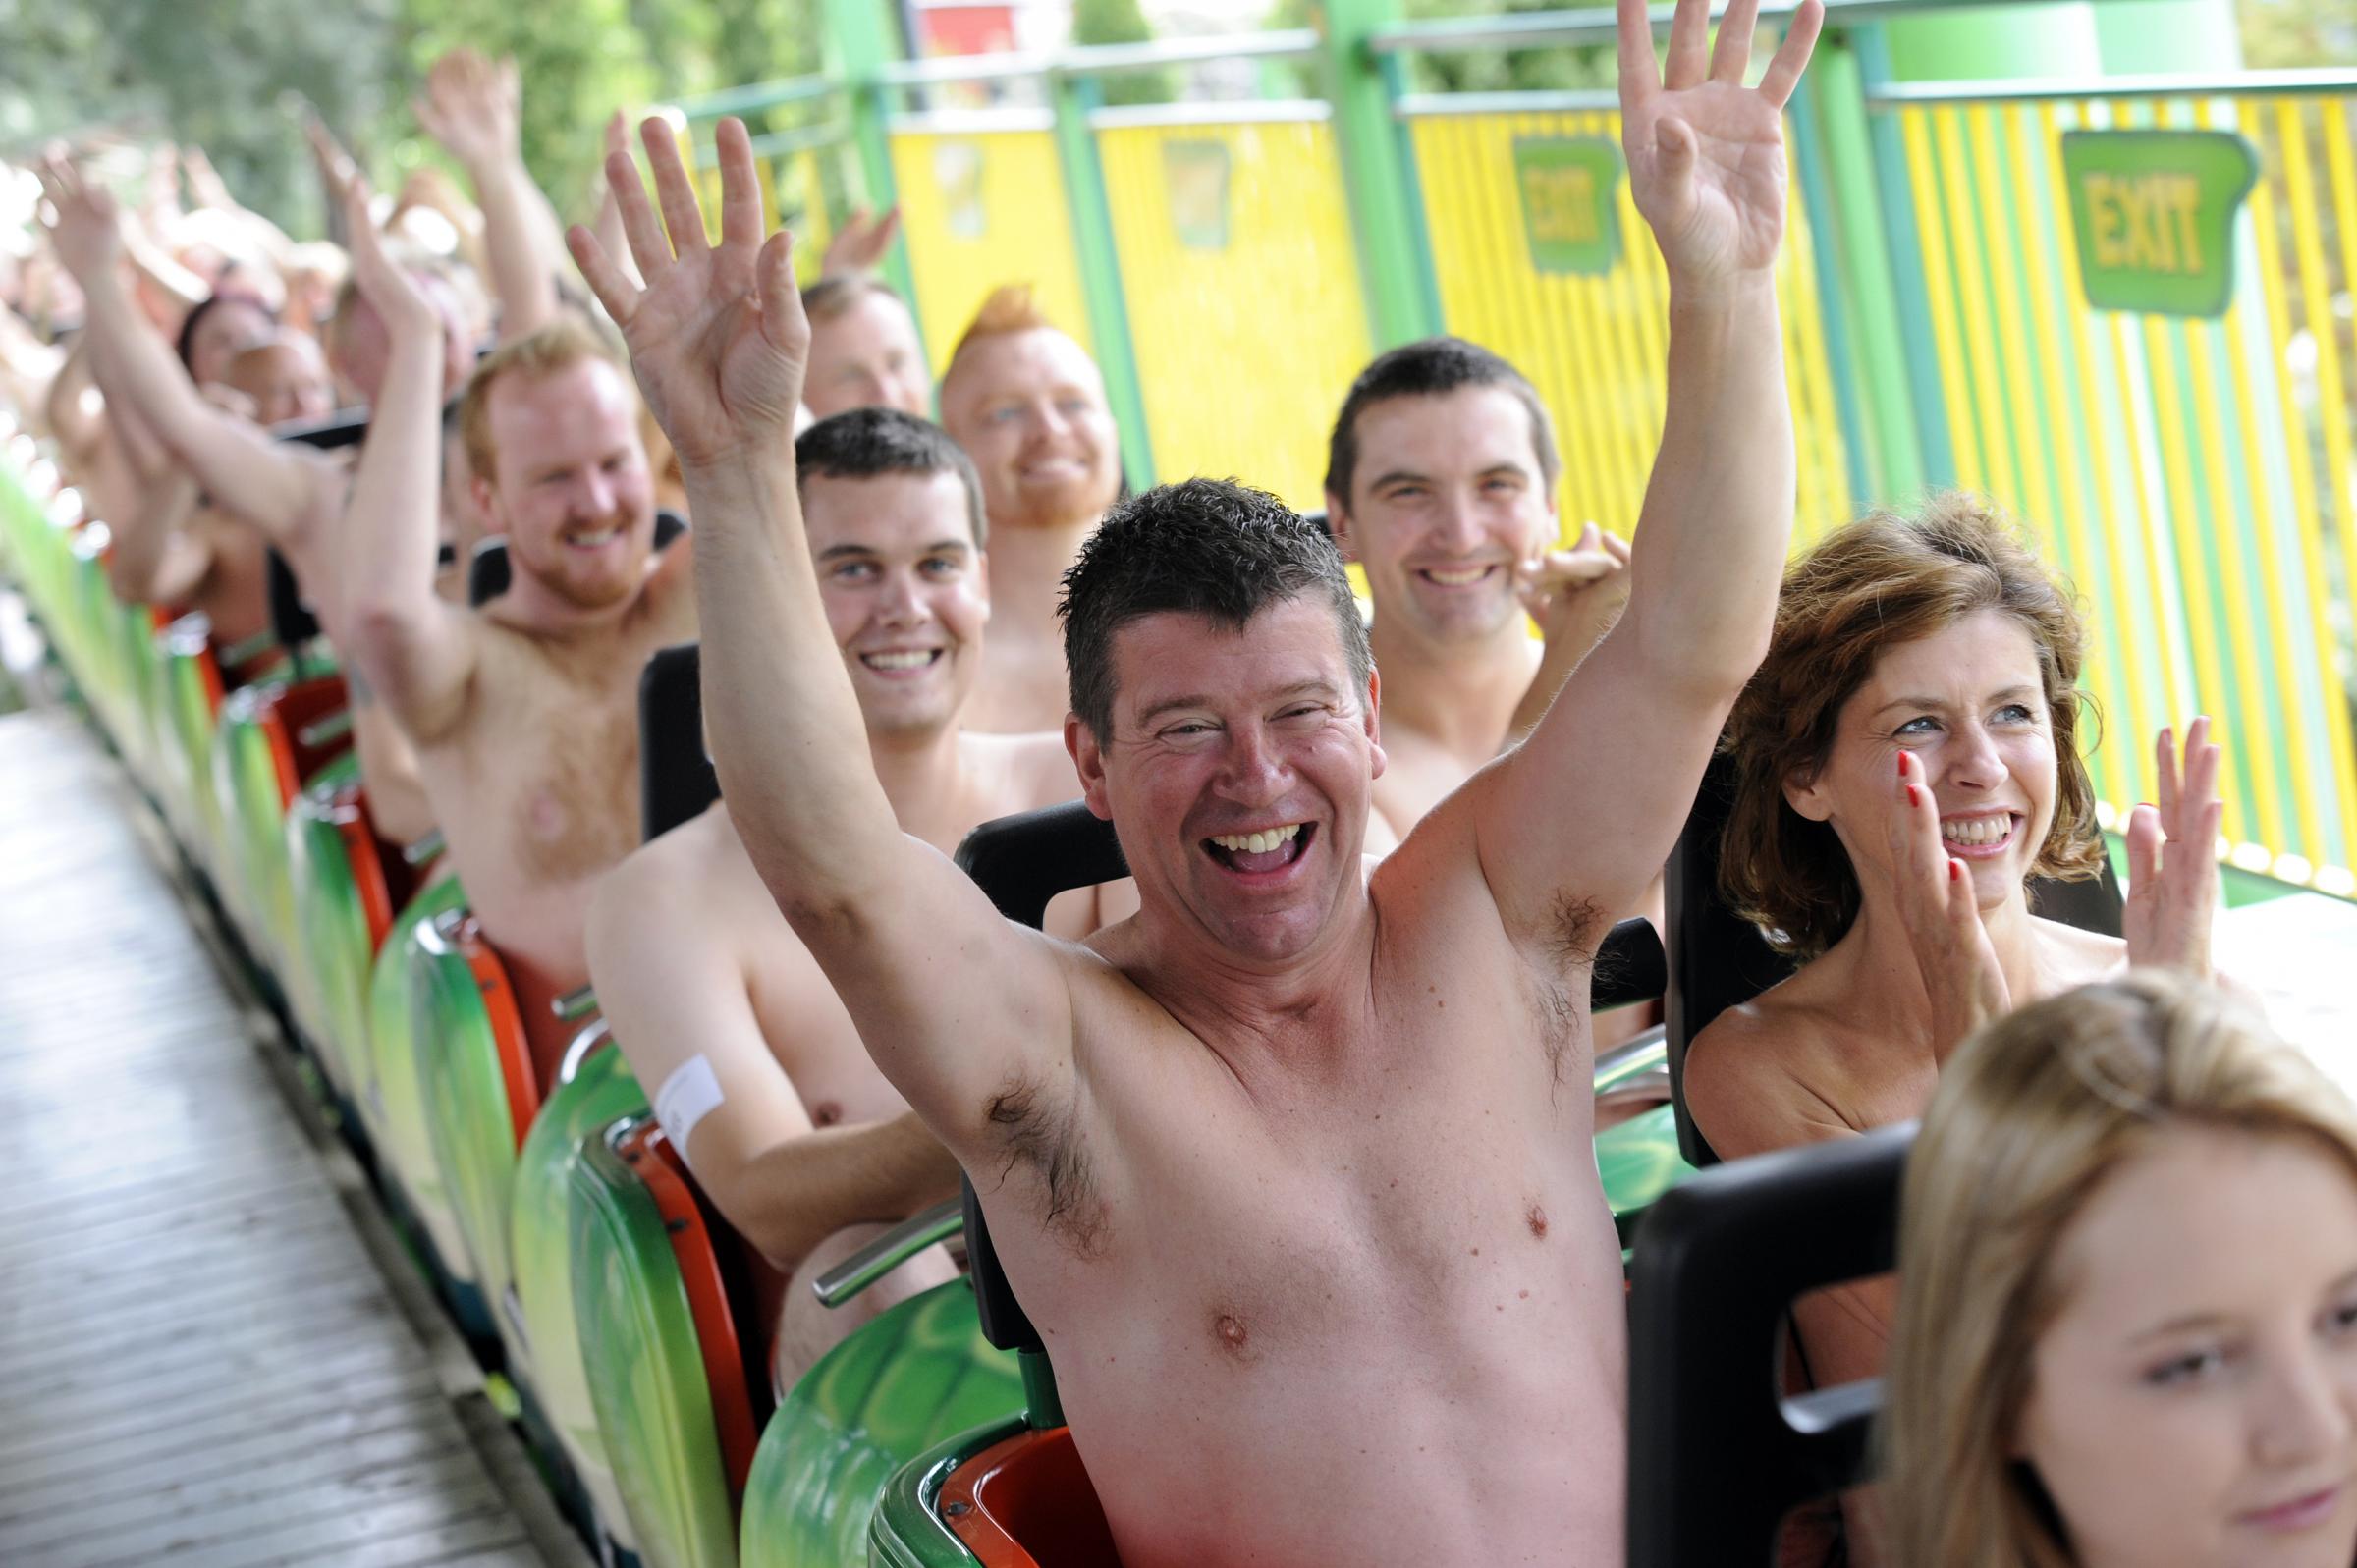 Thrill-streakers sought for naked rollercoaster record attempt | Echo